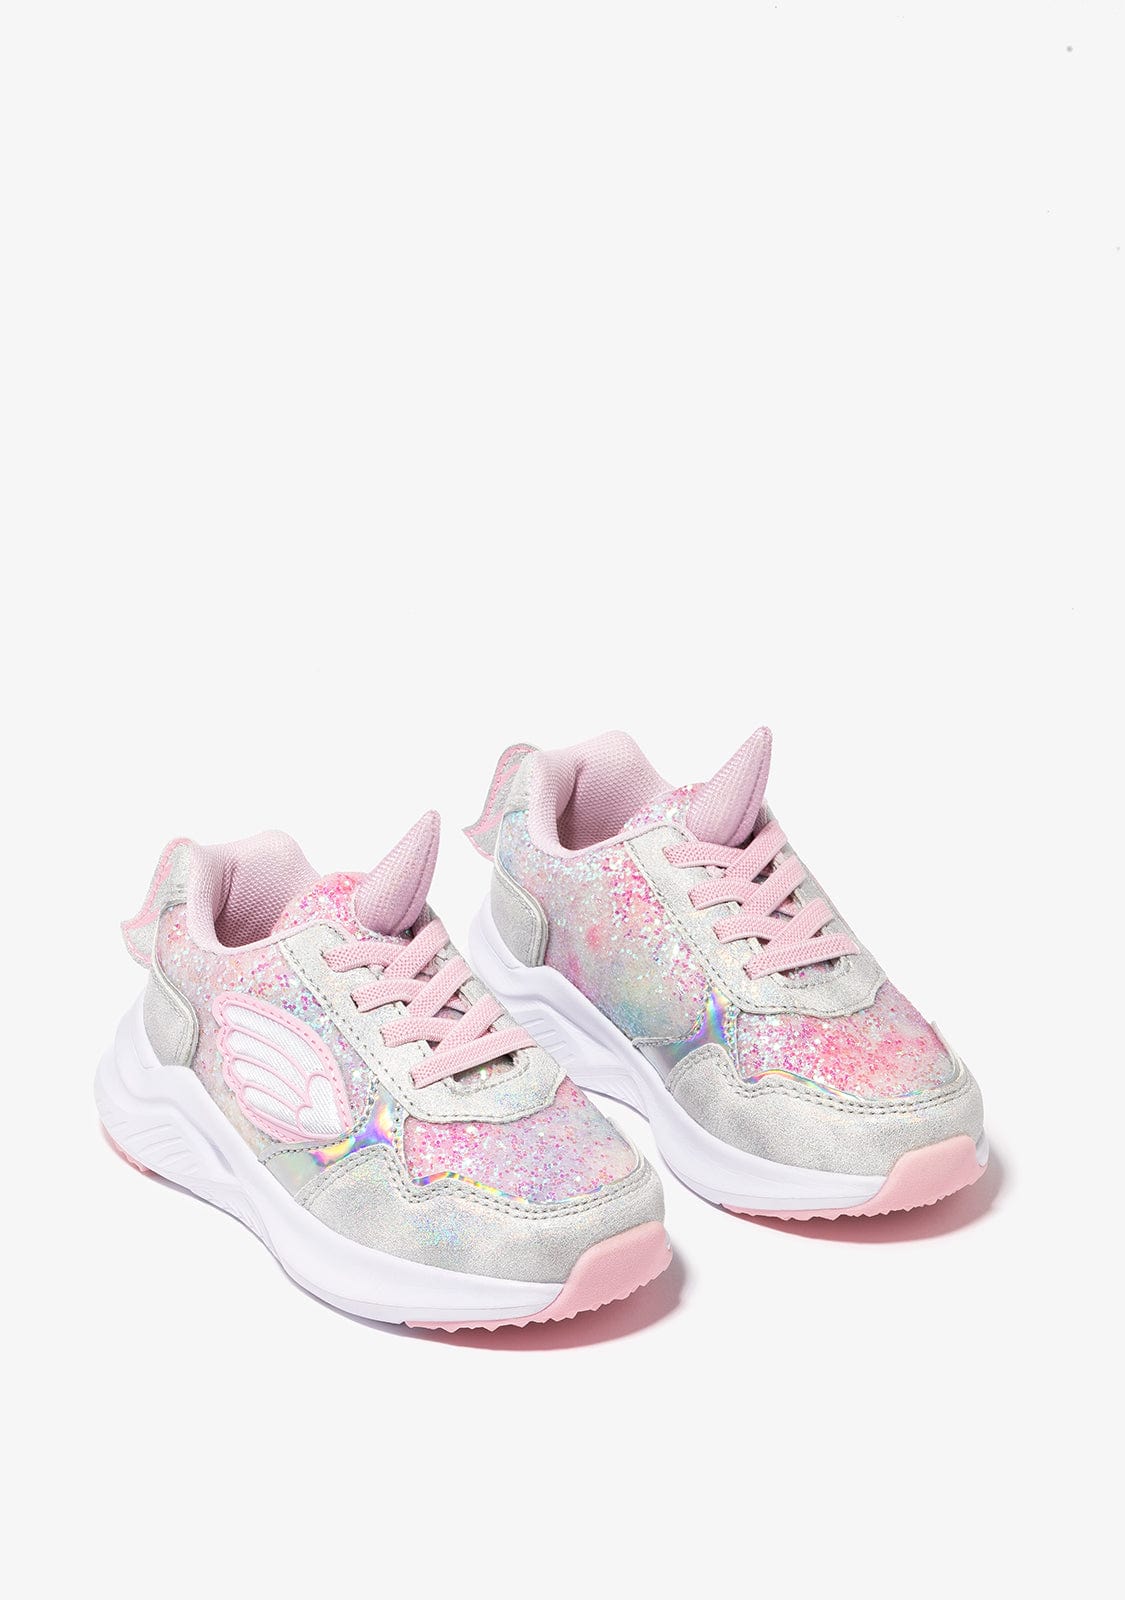 CONGUITOS Shoes Girl's White Unicorn With Lights Sneakers Metallized